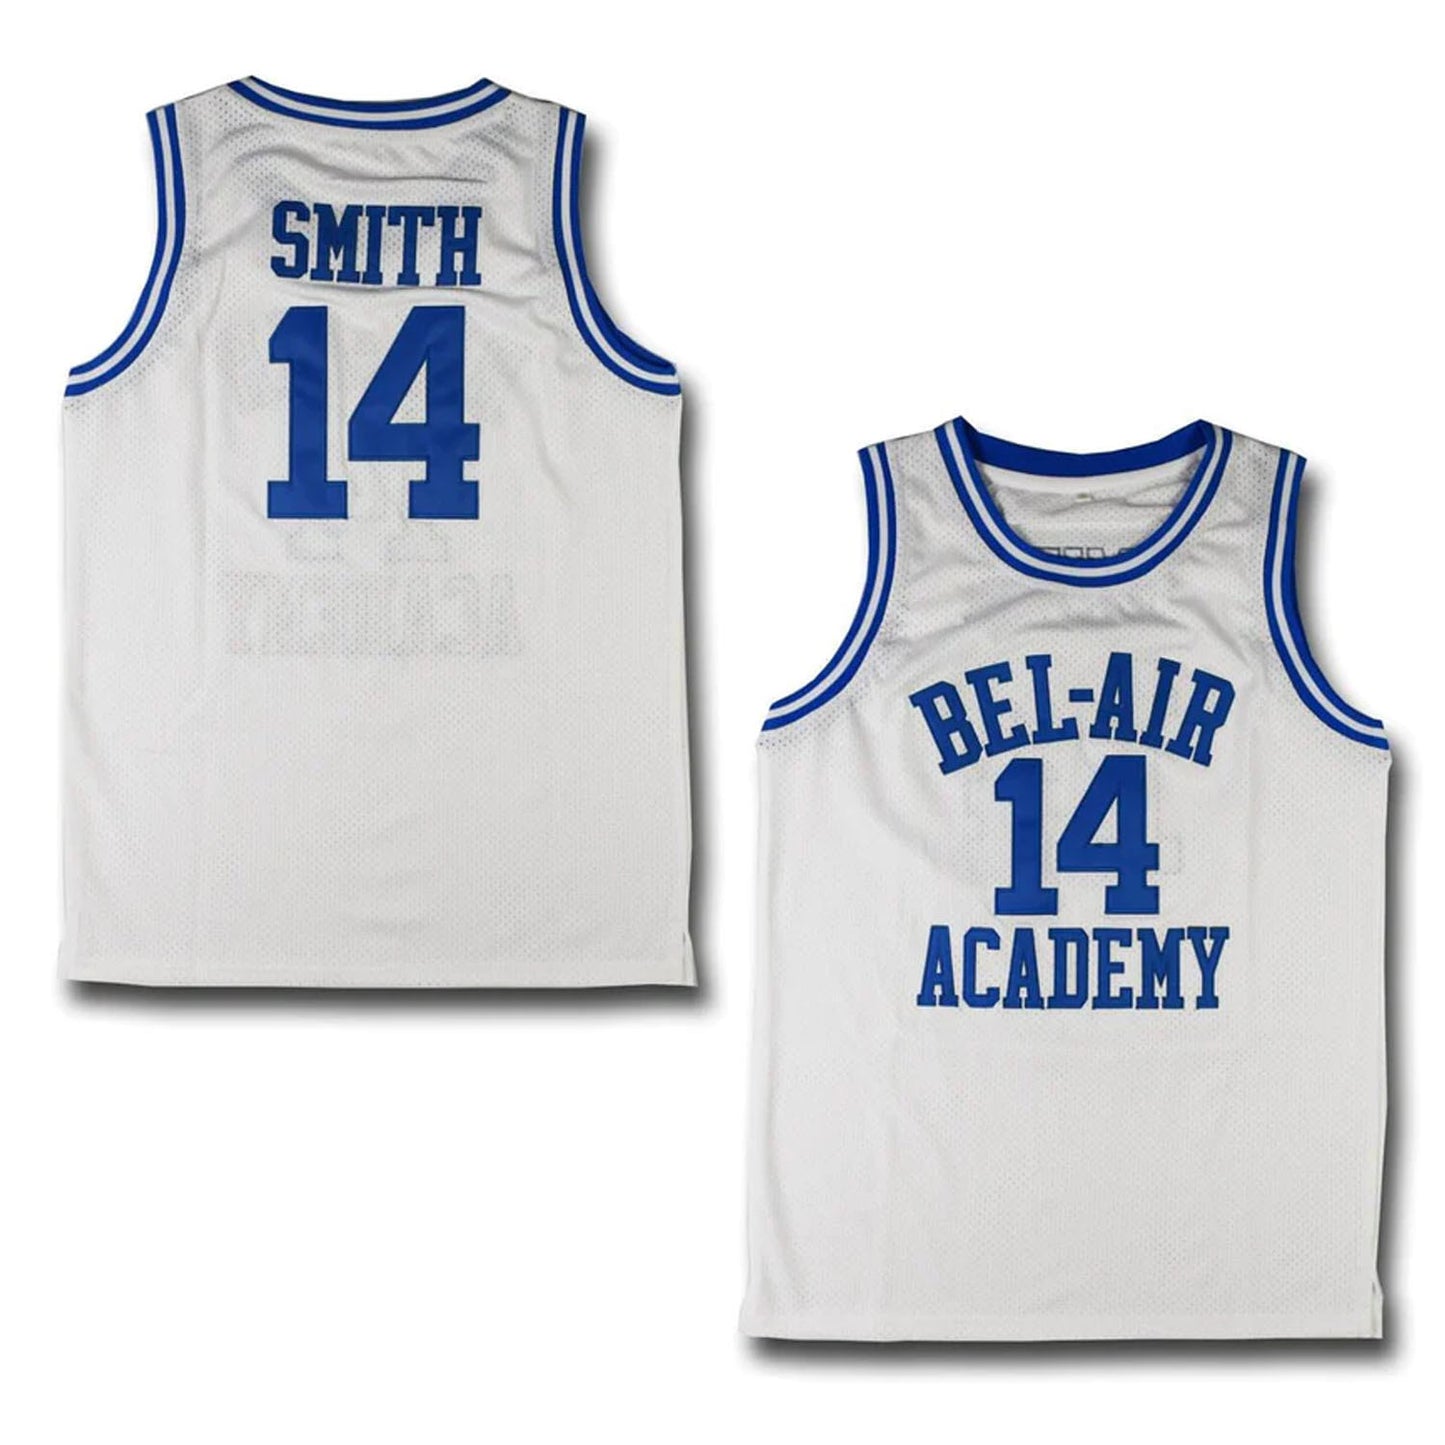 Will Smith #14 Bel-Air Academy Jersey